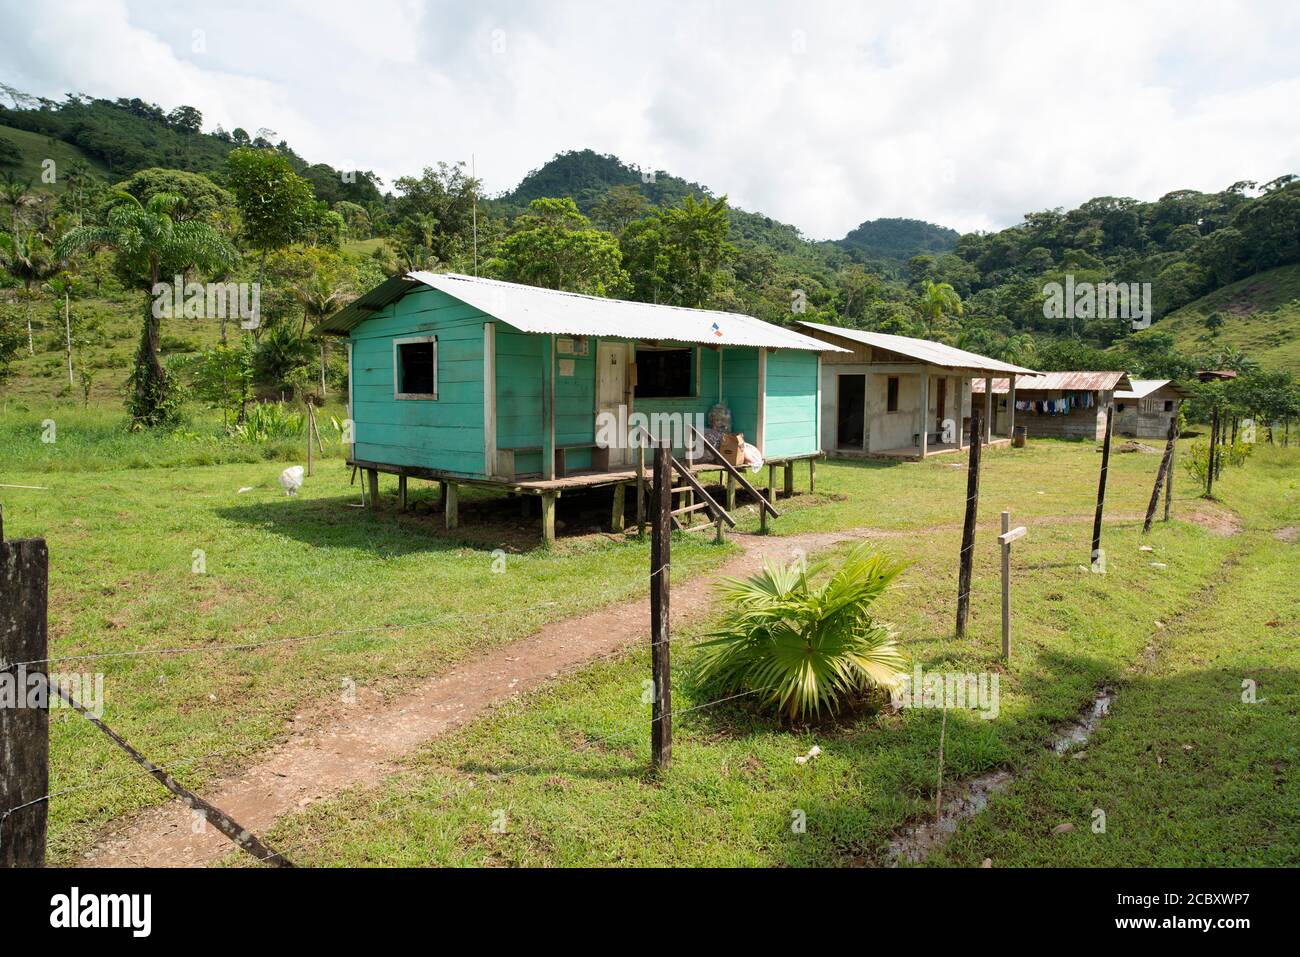 Simple wooden houses in the tiny hamlet of Guabal on the outskirts of Panama's indigenous Ngäbe-Bugle comarca (reservation). Stock Photo